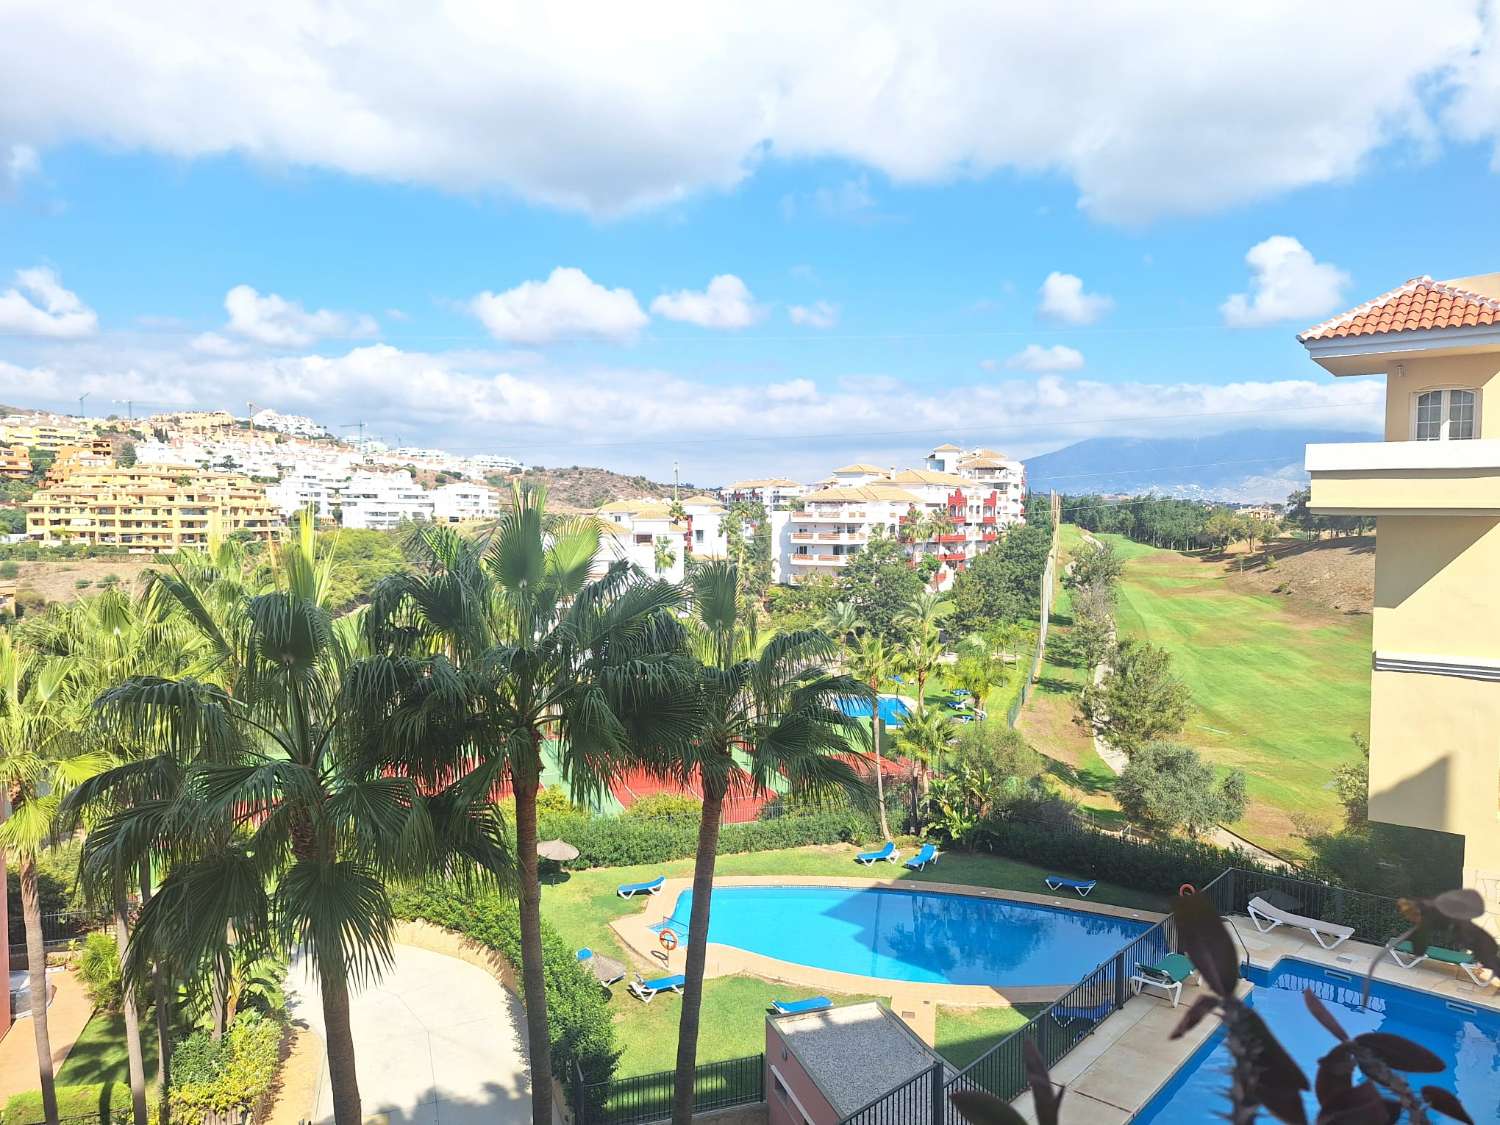 Splendid 2 Bedroom Apartment Steps from the Golf Club with Terrace, Garage and Community Pool in Mijas, Málaga